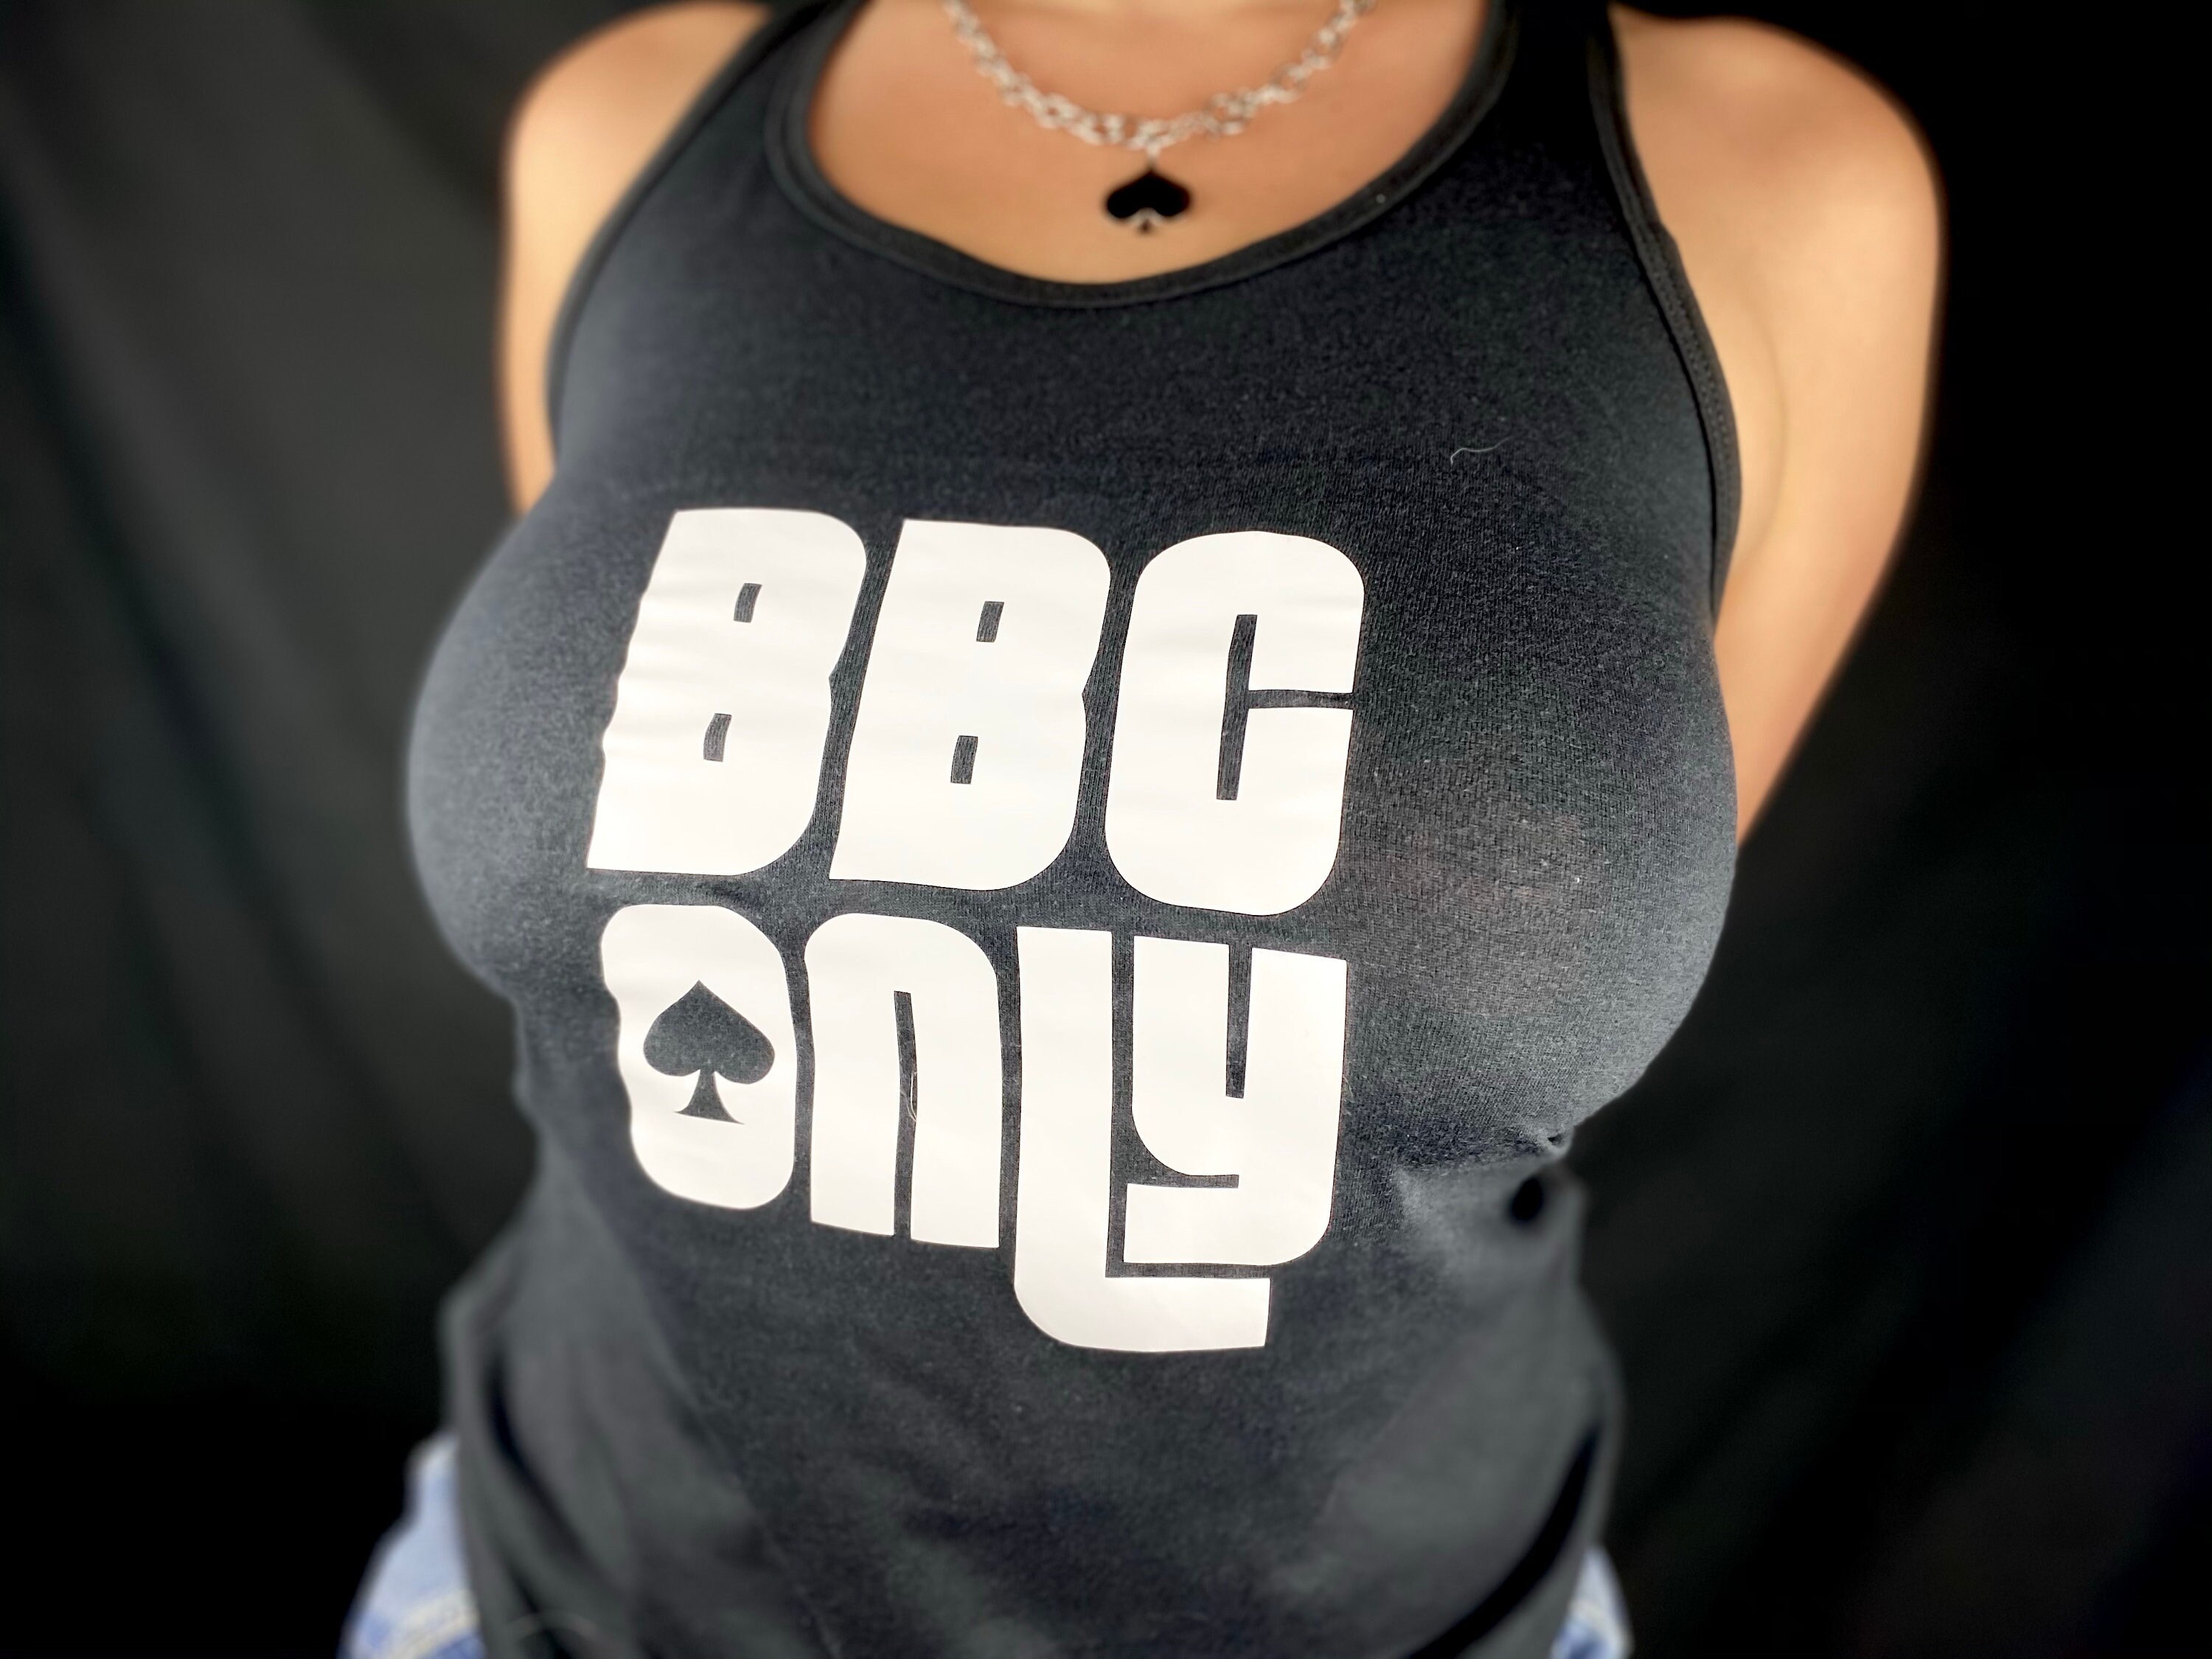 Bbc only clothes